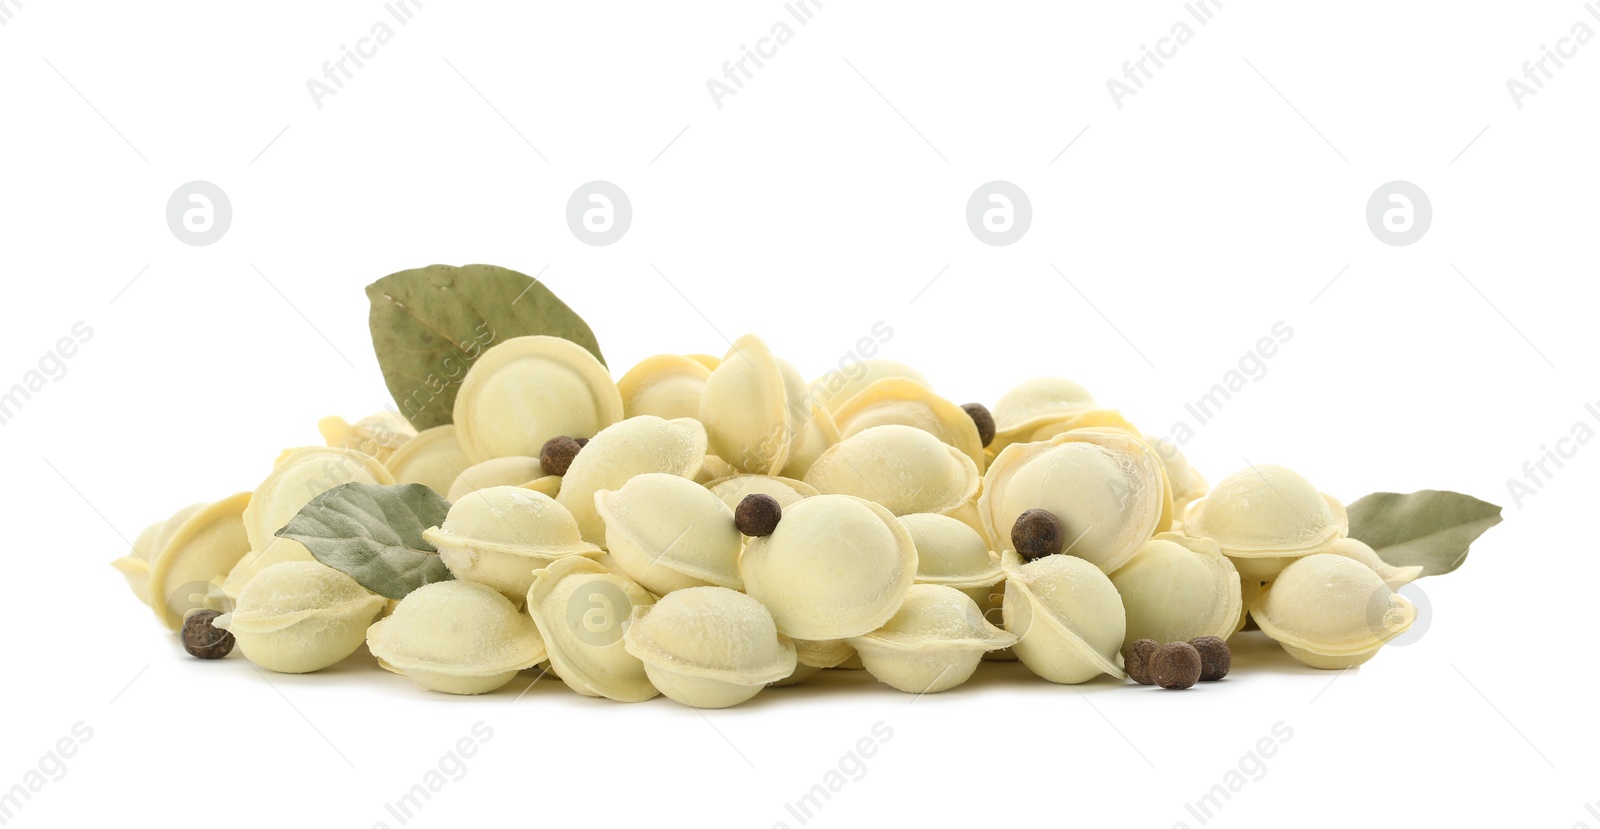 Photo of Raw meat dumplings with bay leaves and pepper on white background